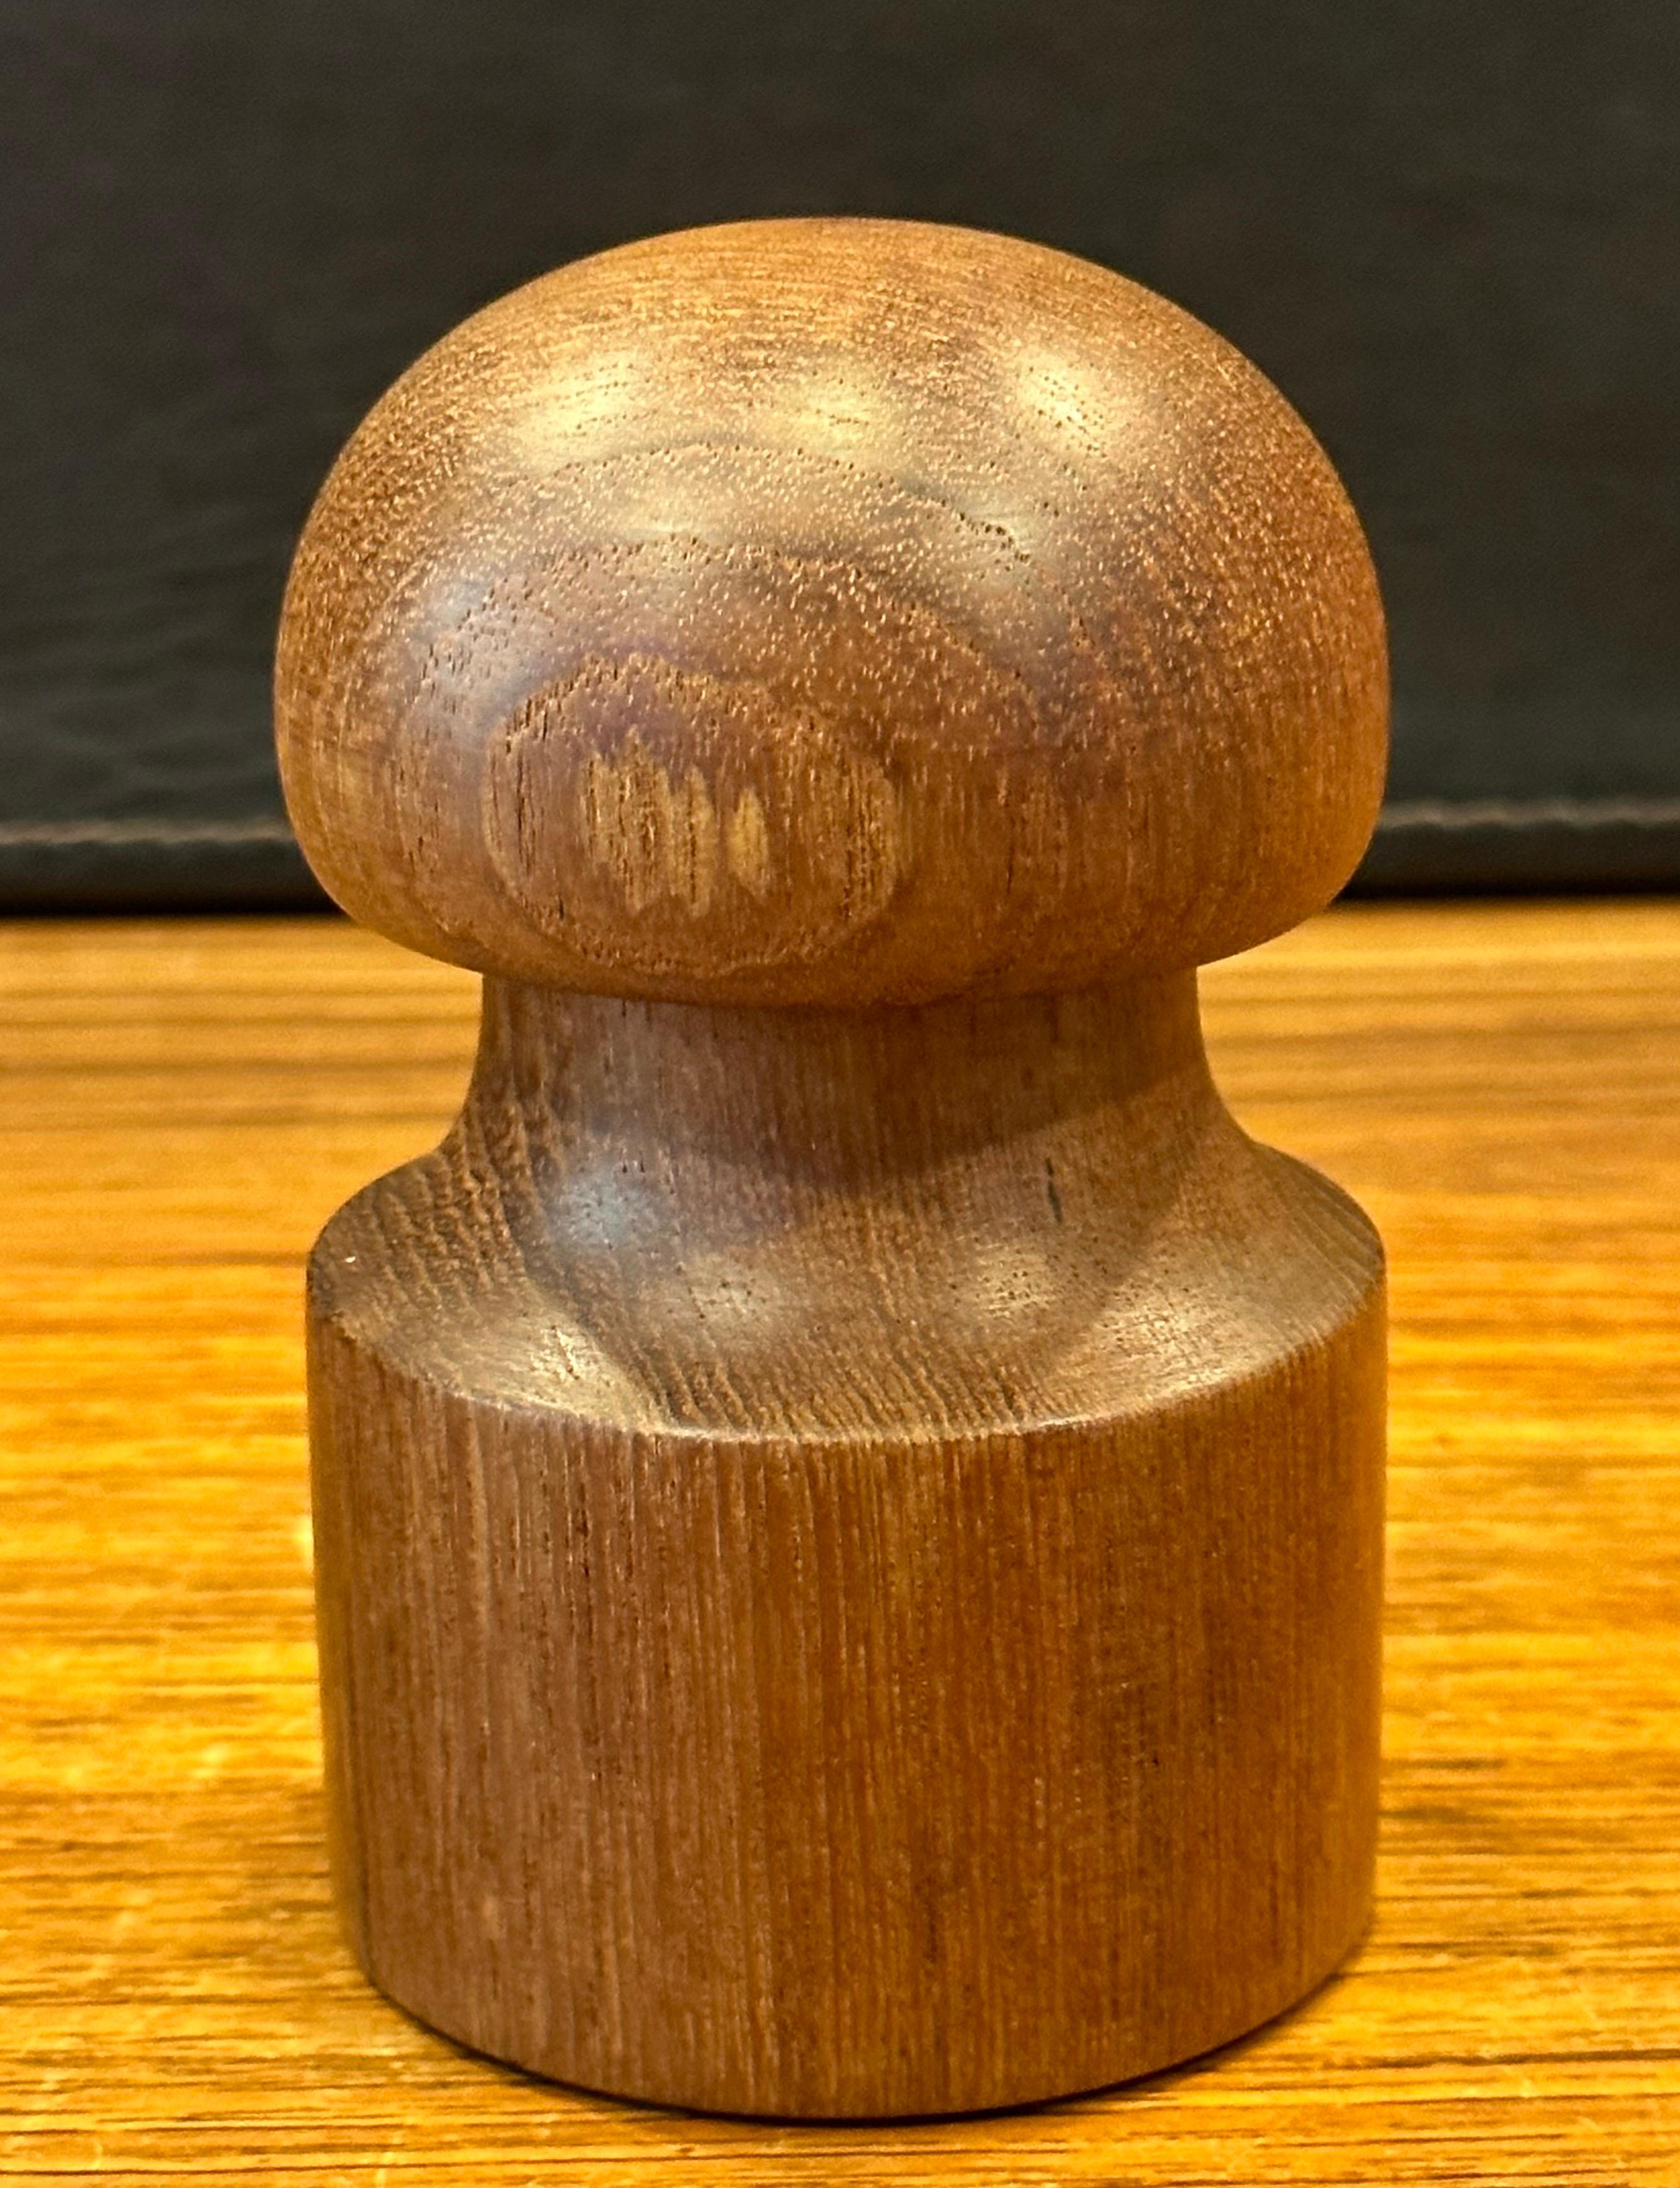 Pair of MCM Teak Salt and Pepper Shakers with Box by Jens Quistgaard for Dansk In Good Condition For Sale In San Diego, CA